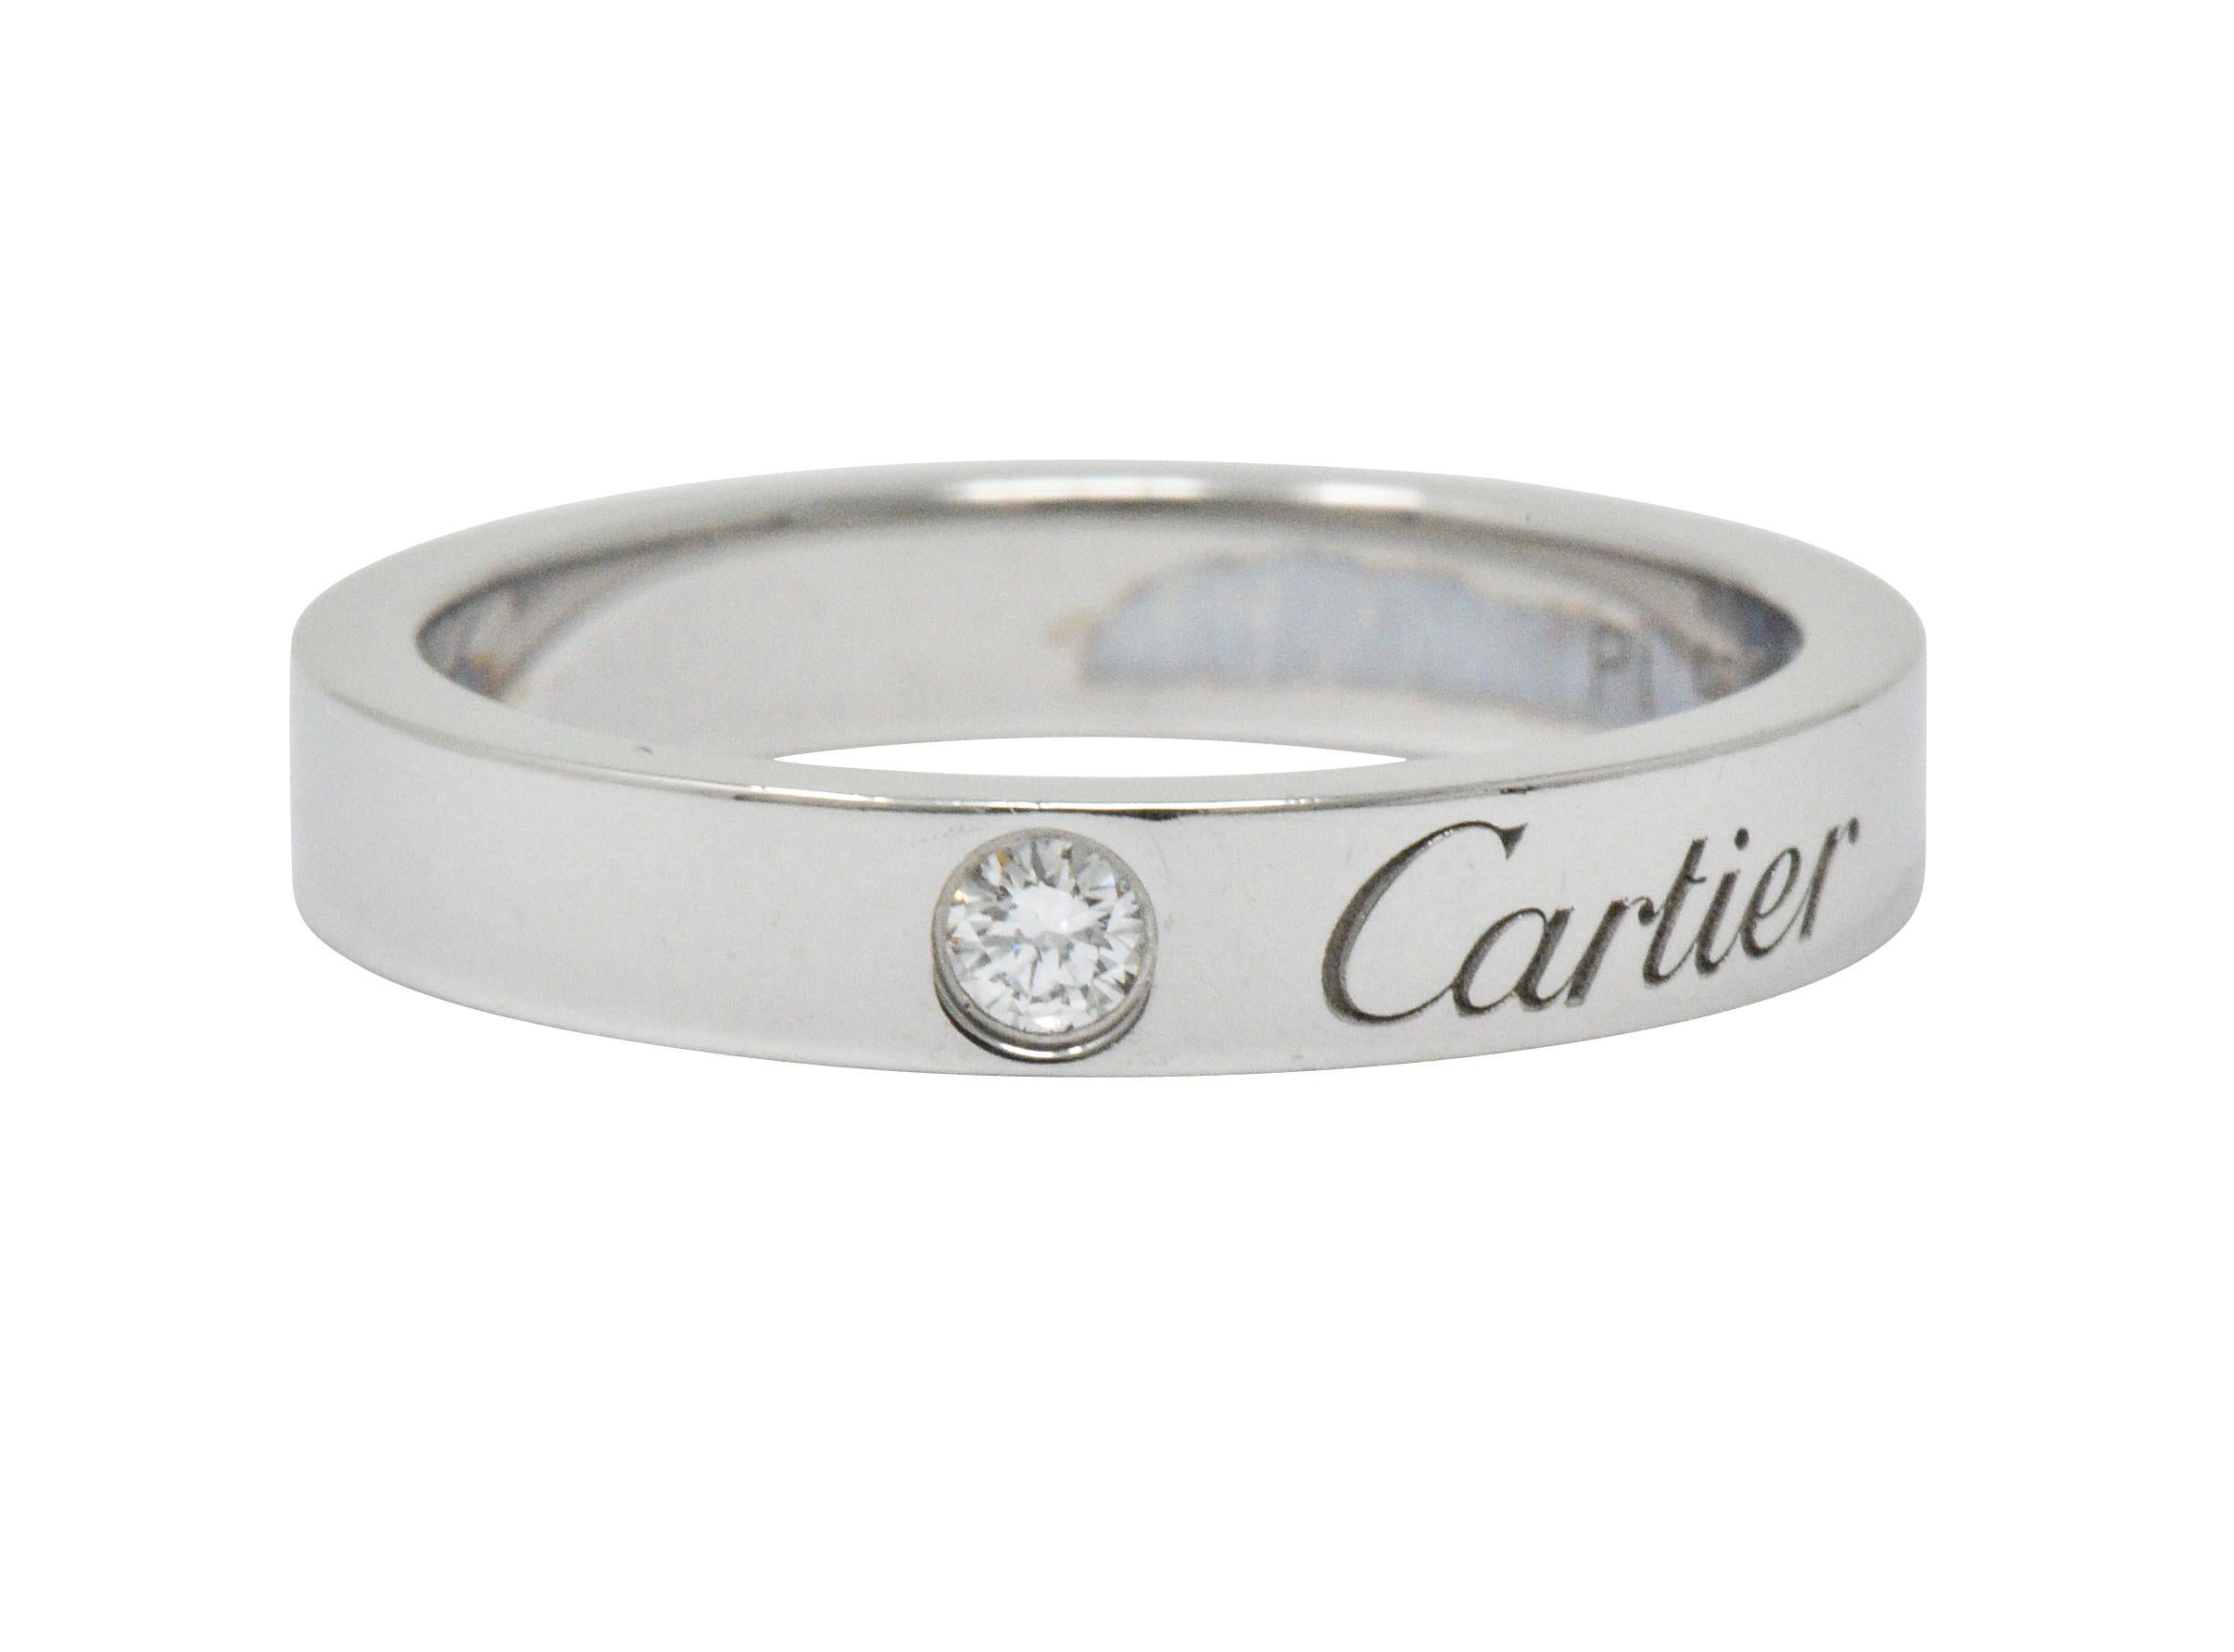 Featuring 1 flush set round brilliant cut diamond weighing 0.03 carats total, G color and VS clarity

Straight flat band

Fully signed Cartier on front

Stamped with maker's mark and numbered

Ring Size: 4 & Sizable

Top measures 3.0 mm and sits 1.5